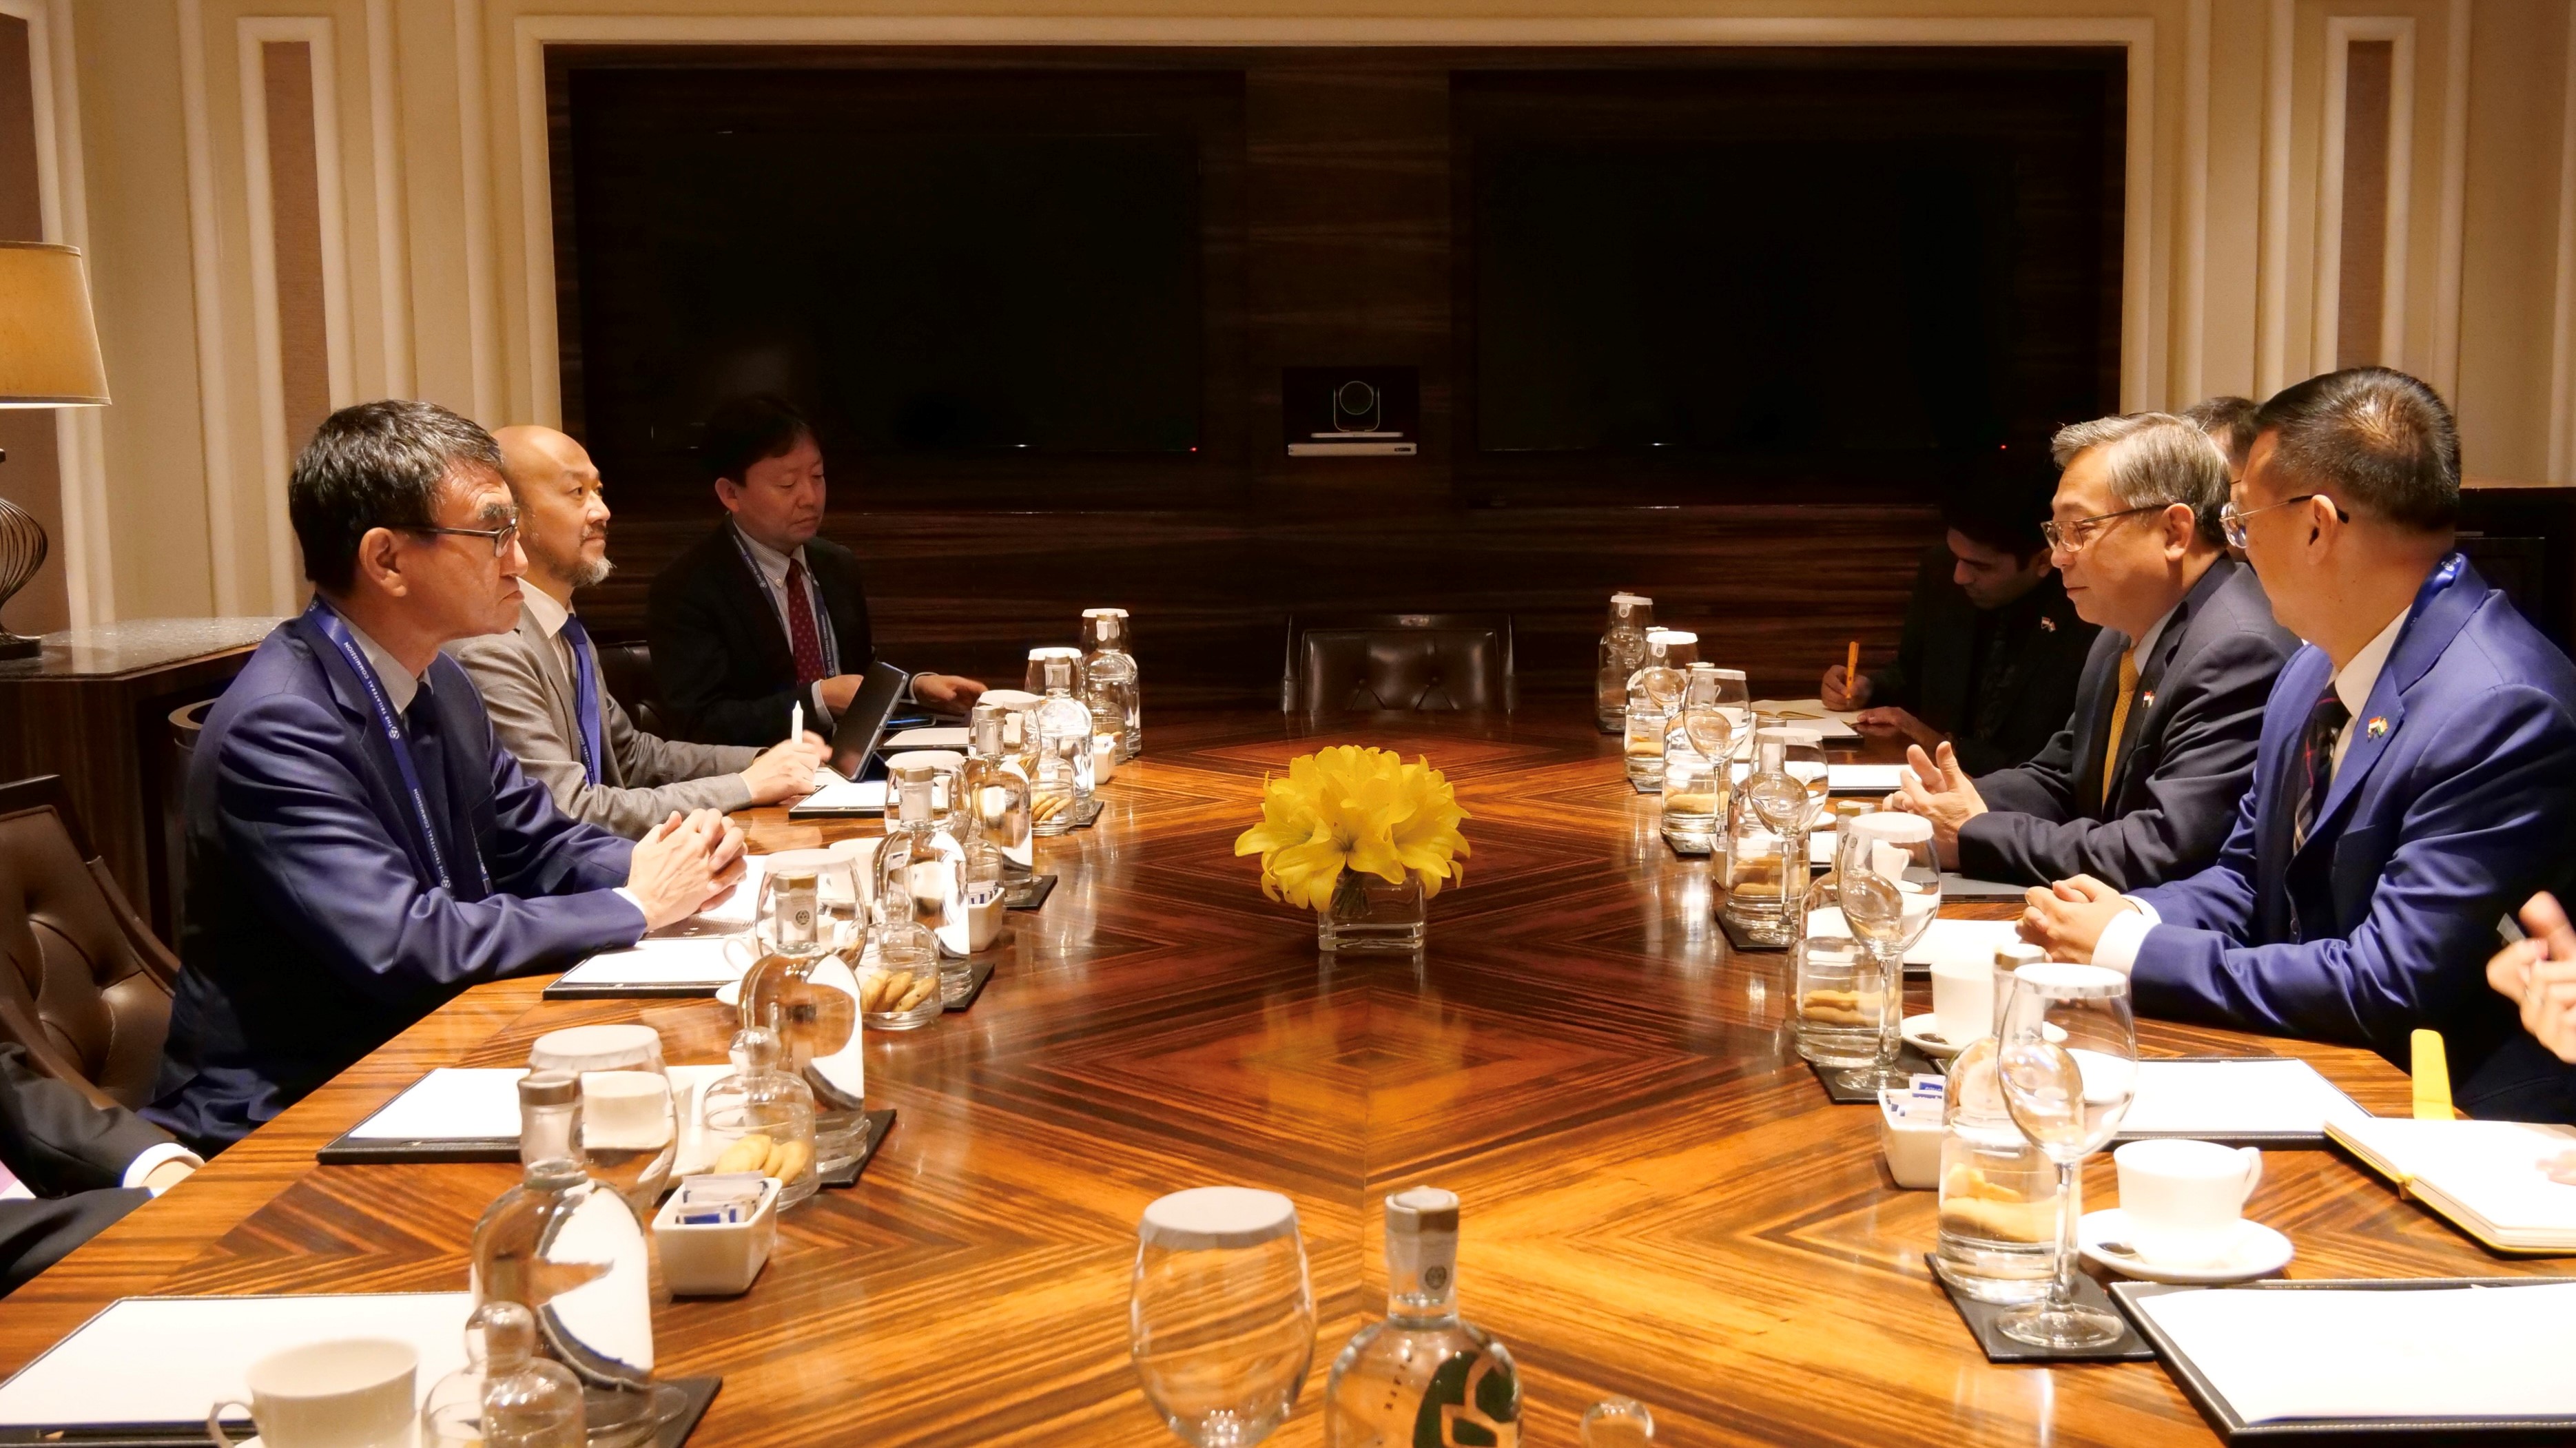 Minister Kono exchanging views with Mr. Gam Kim YONG, Minister for Trade and Industry, Singapore.